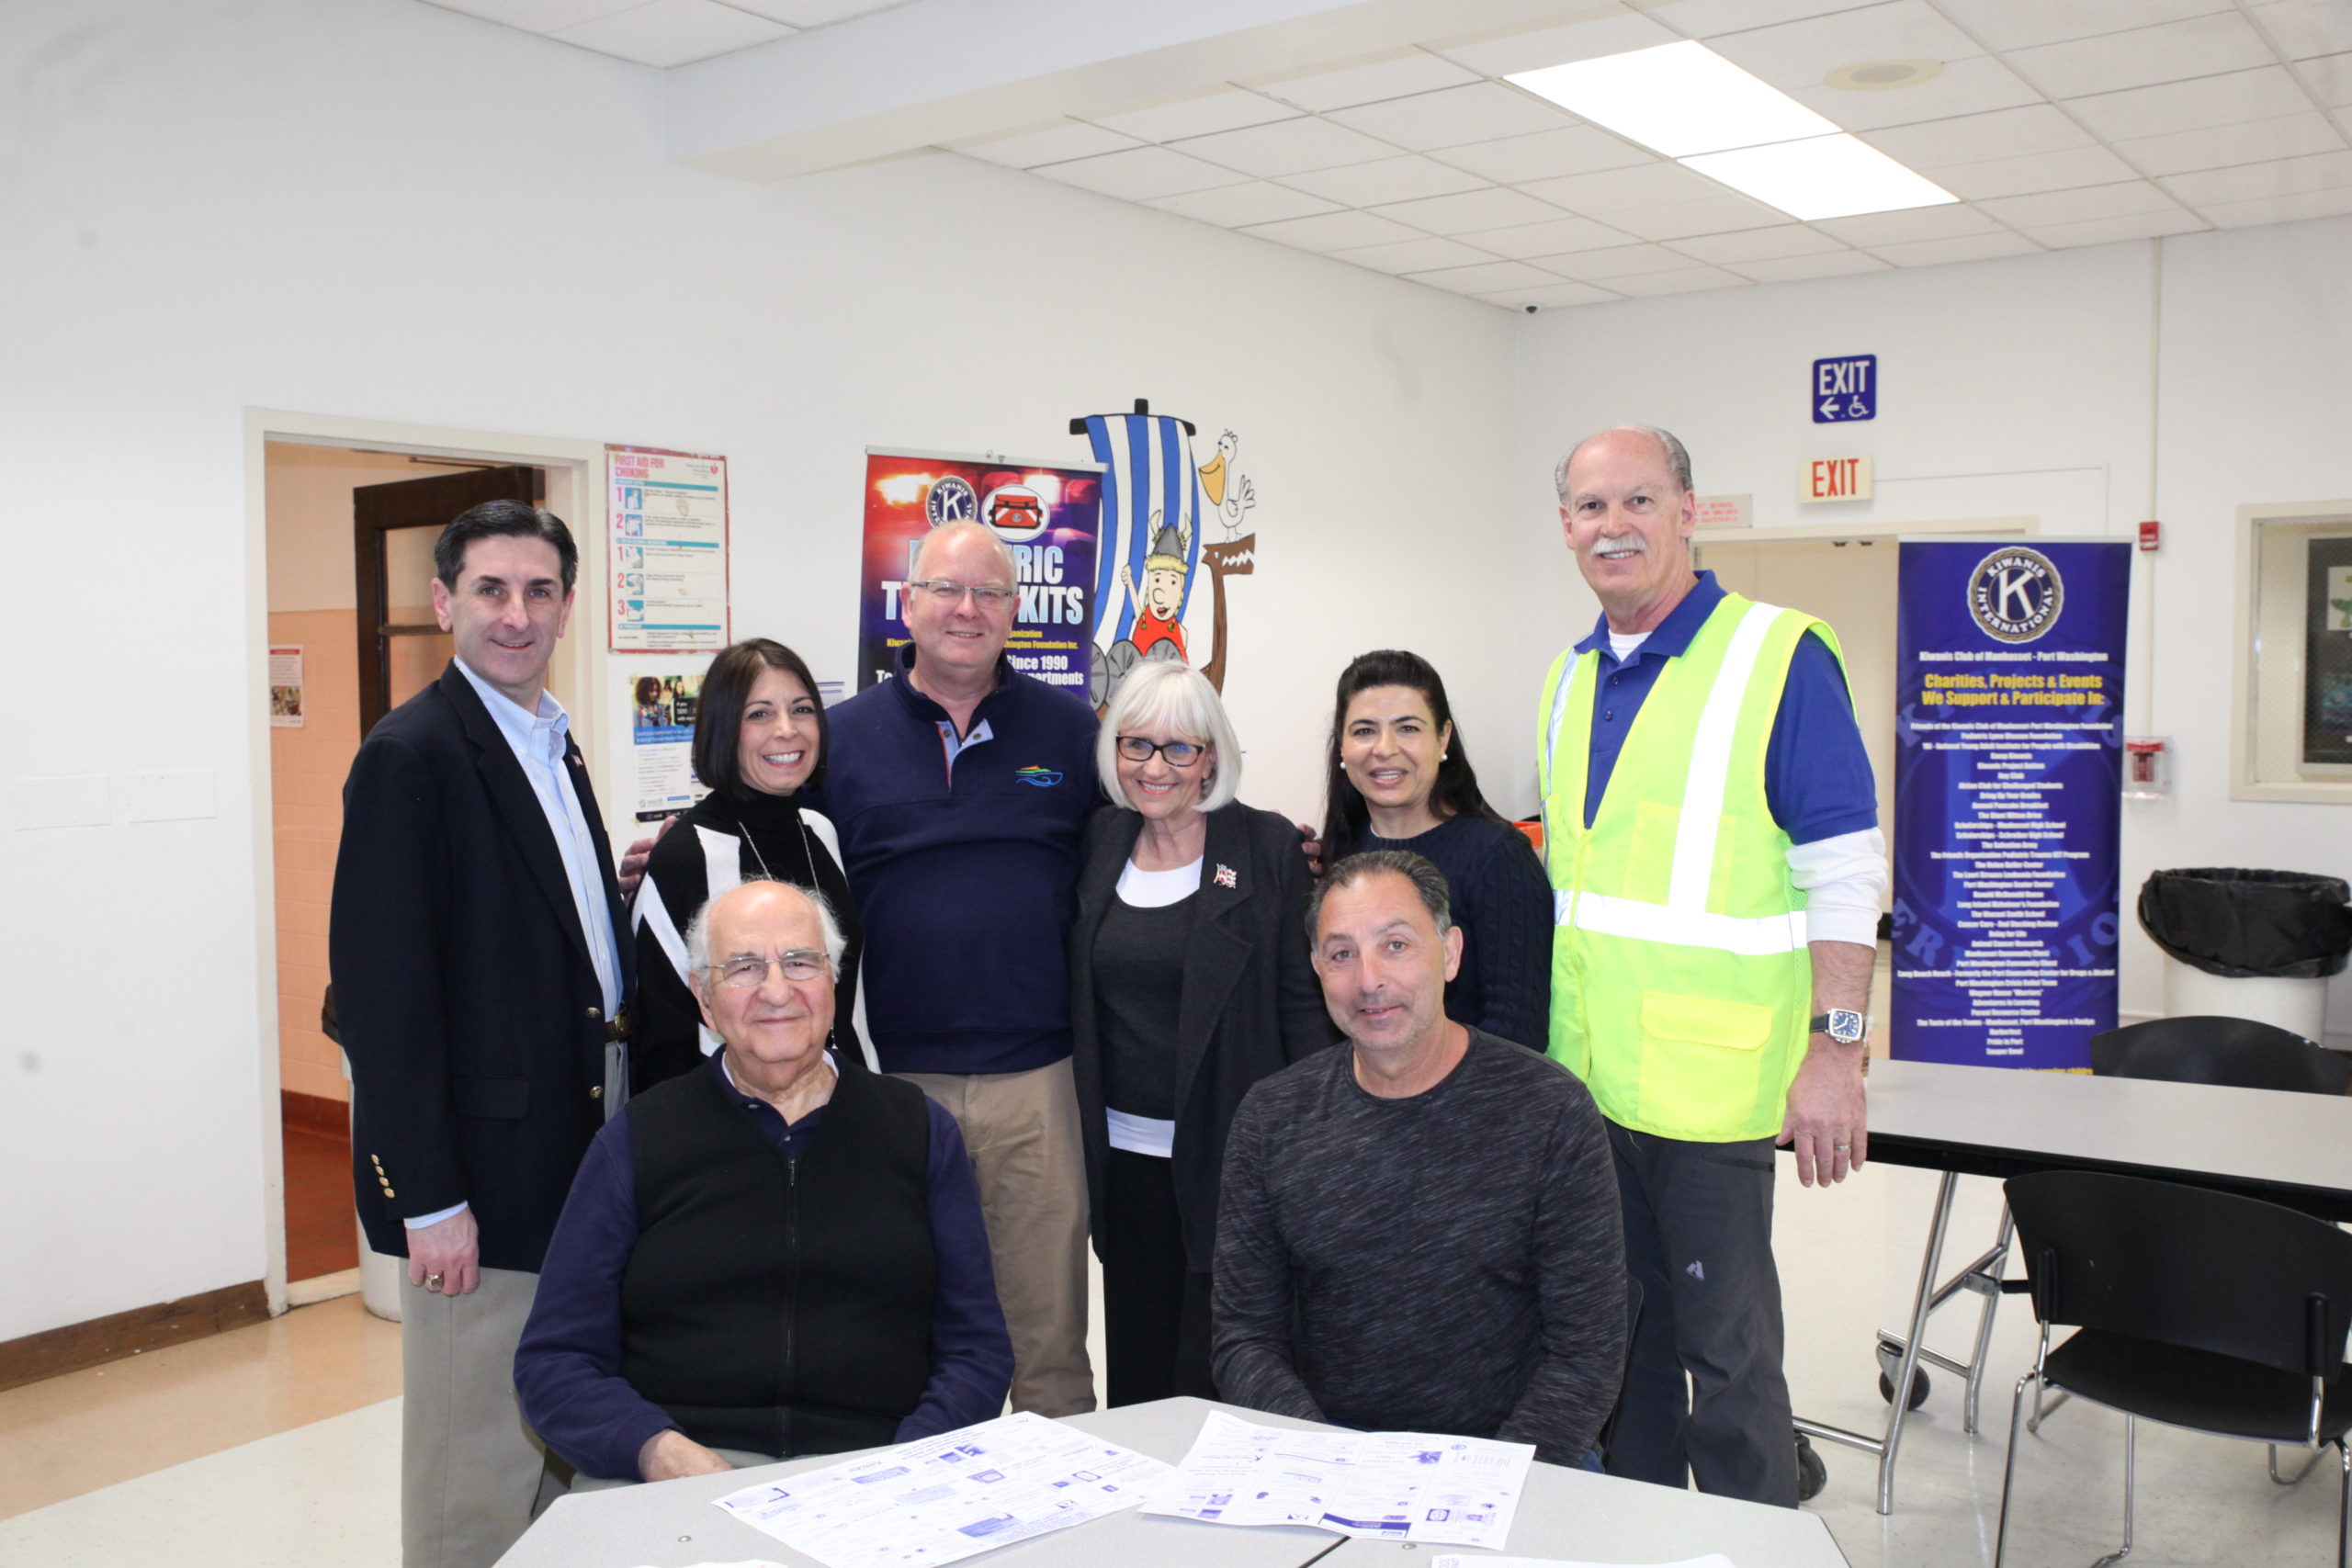 Town Clerk Wayne Wink, Council Member Dina De Giorgio, Bill Gordon, Supervisor Judi Bosworth, Council Member Anna Kaplan, Lt. Governor-Elect of Kiwanis Club of Manhasset-Port Washington Jeff Stone and Mike Ruffano and Joe Domina gathered together for a charitable breakfast. (Photo courtesy of the Town of North Hempstead)